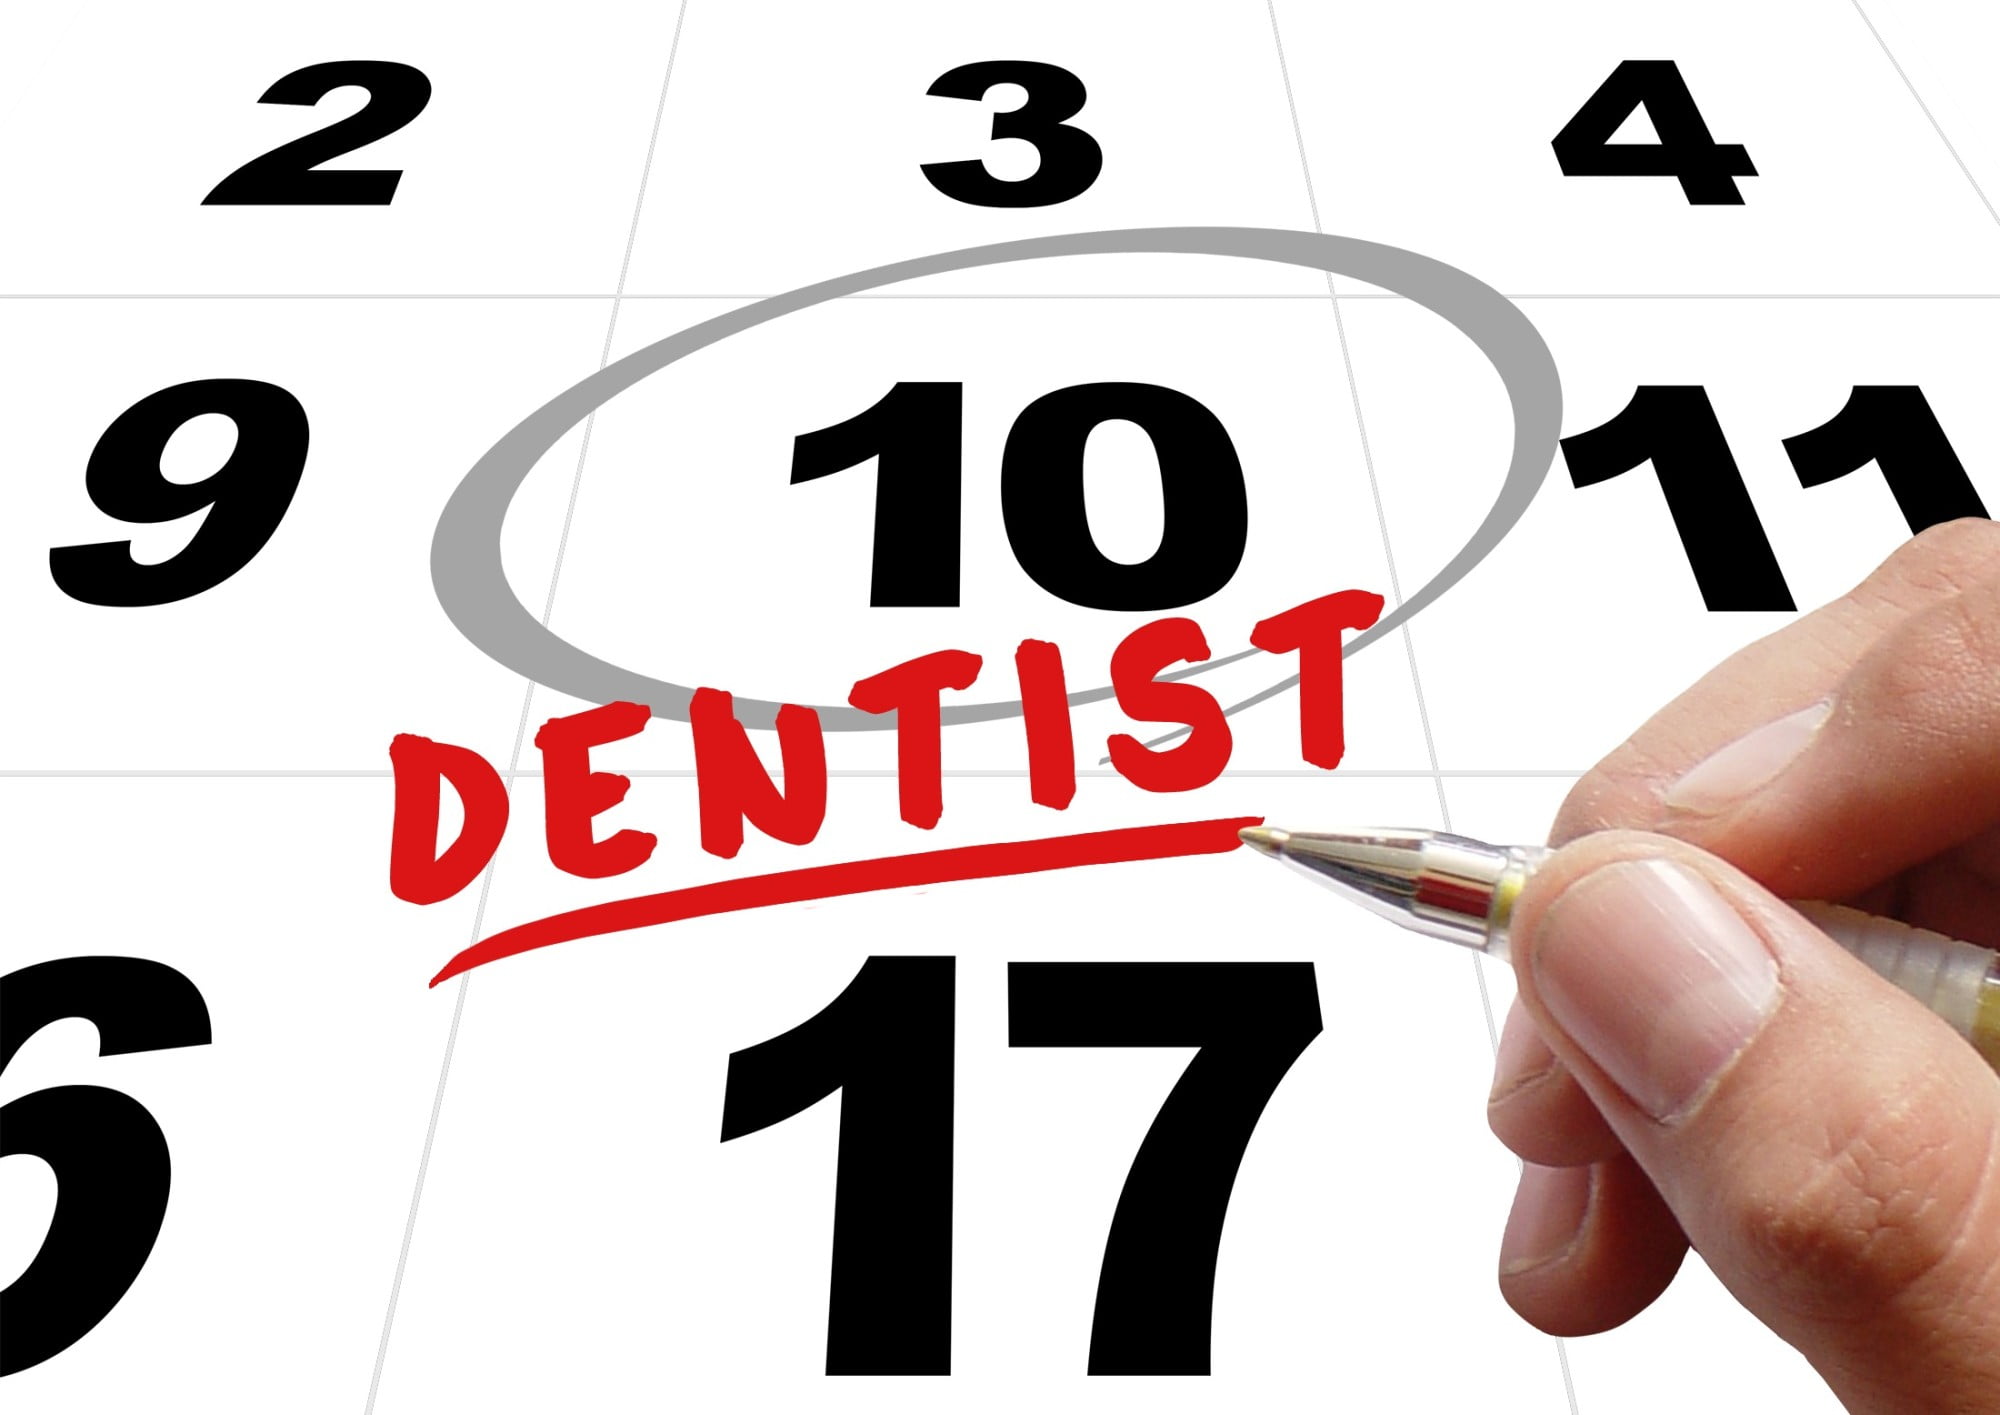 Are you moving? Switching to a new dentist takes a bit of work. Follow this step-by-step guide to making a dentist appointment with a new practice.